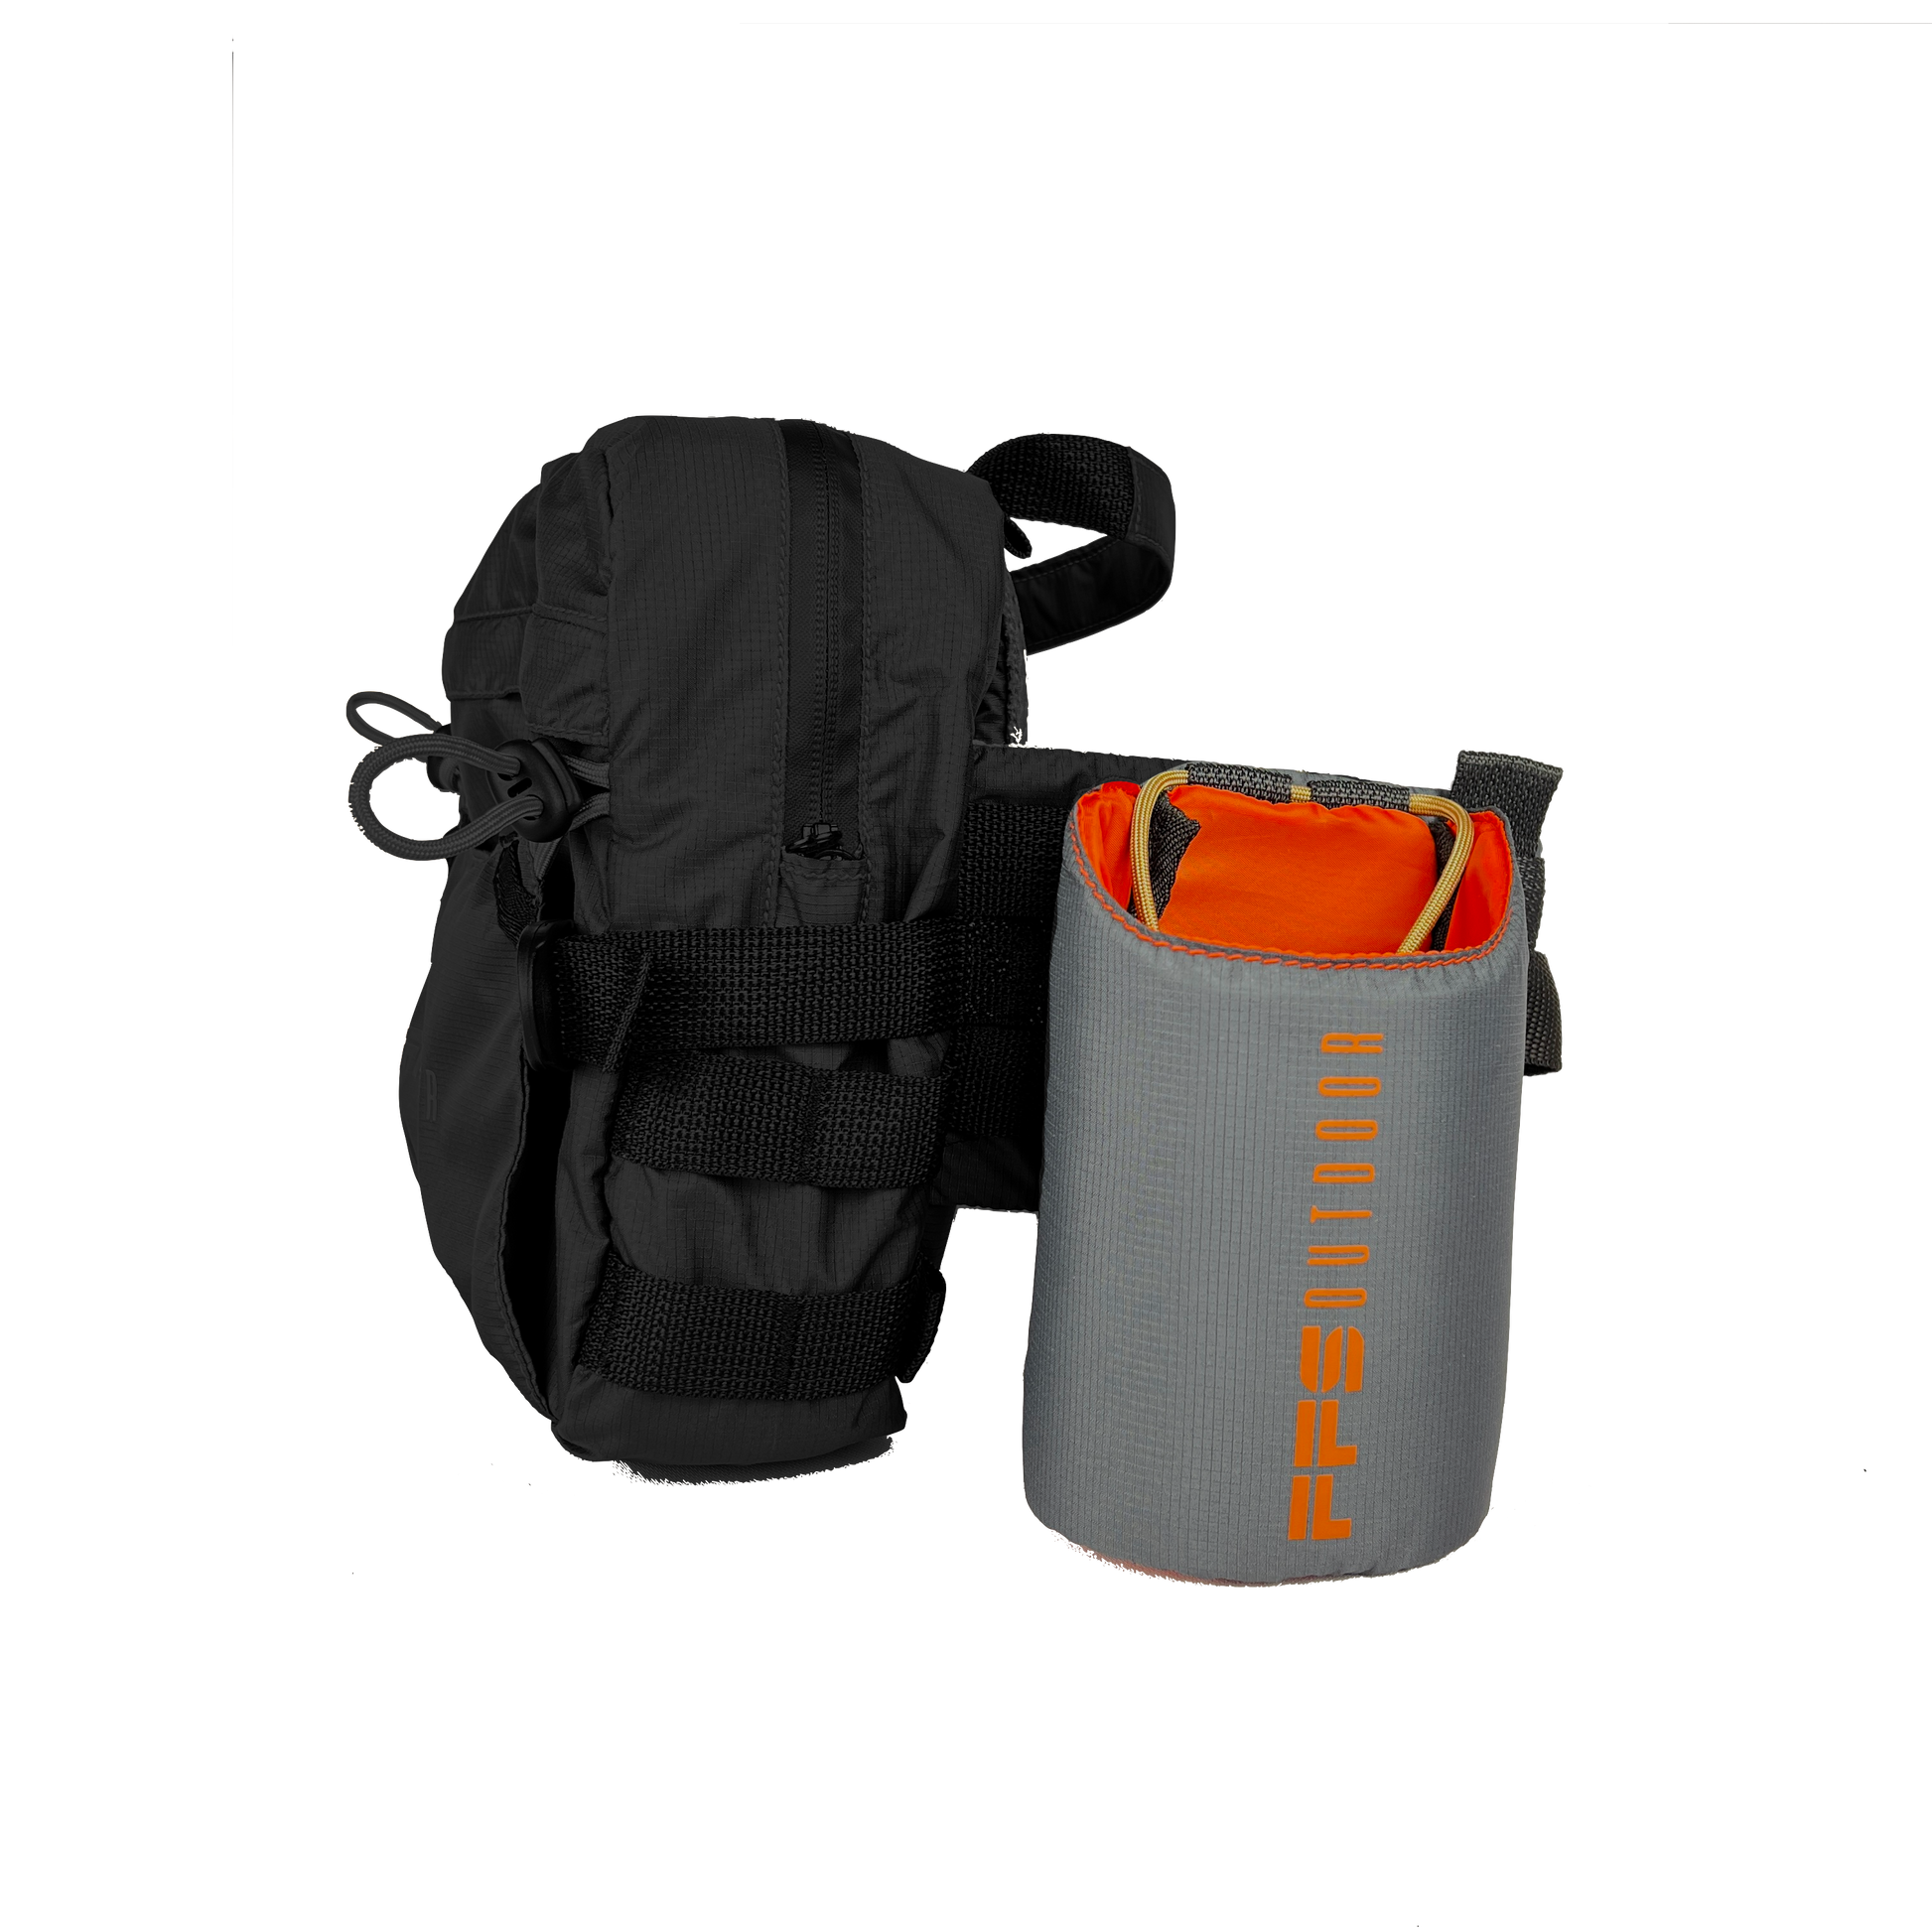 Fanny lumbar gear bag for fishing and hunting with hydration bag